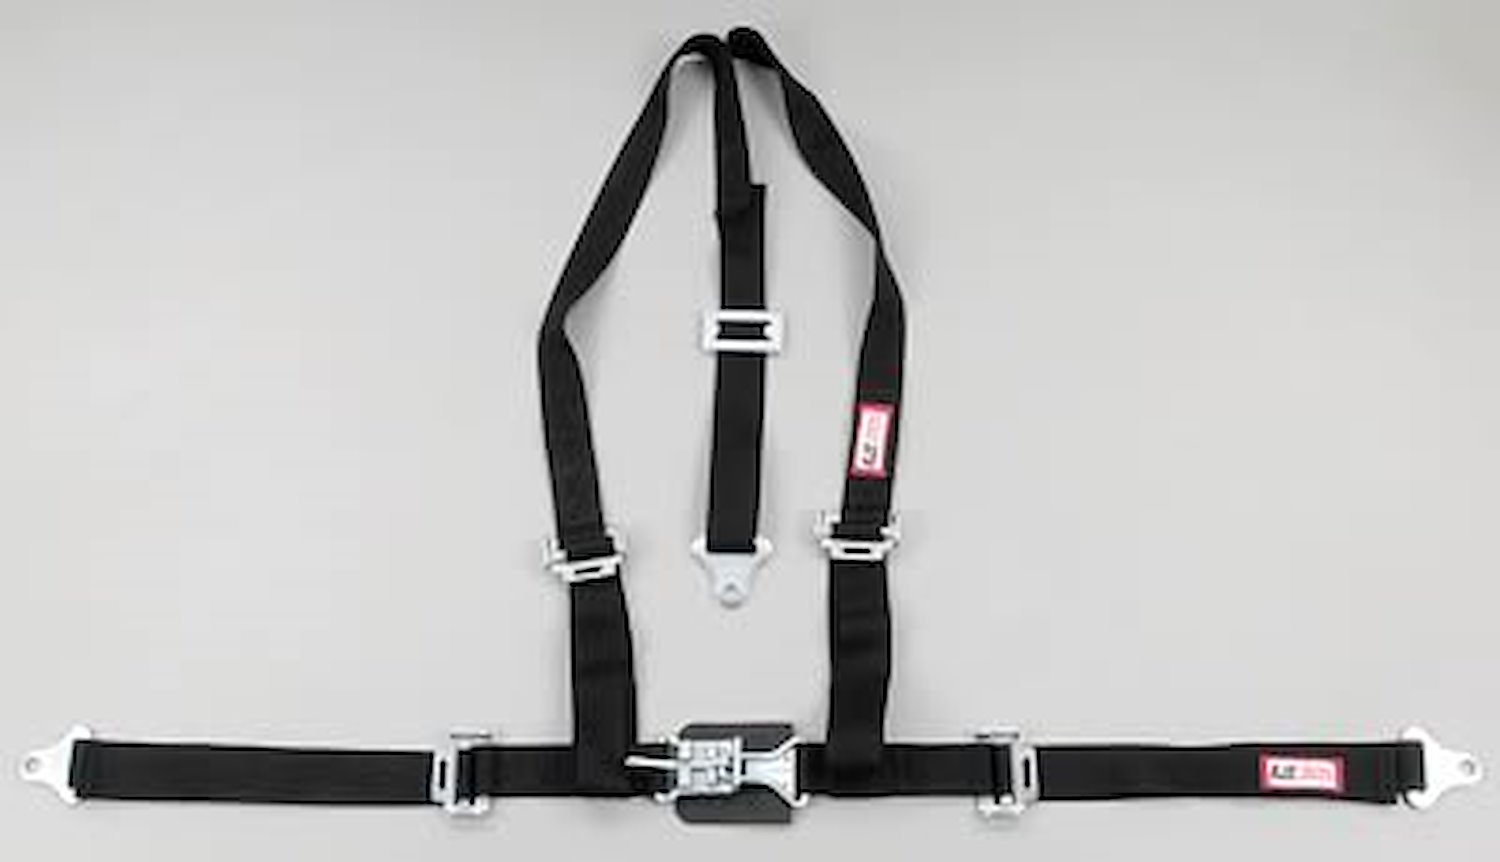 NON-SFI L&L HARNESS 2 PULL UP Lap Belt SNAP SEWN IN 2 S.H. INDIVIDUAL FLOOR Mount w/STERNUM STRAP WRAP/BOLT YELLOW